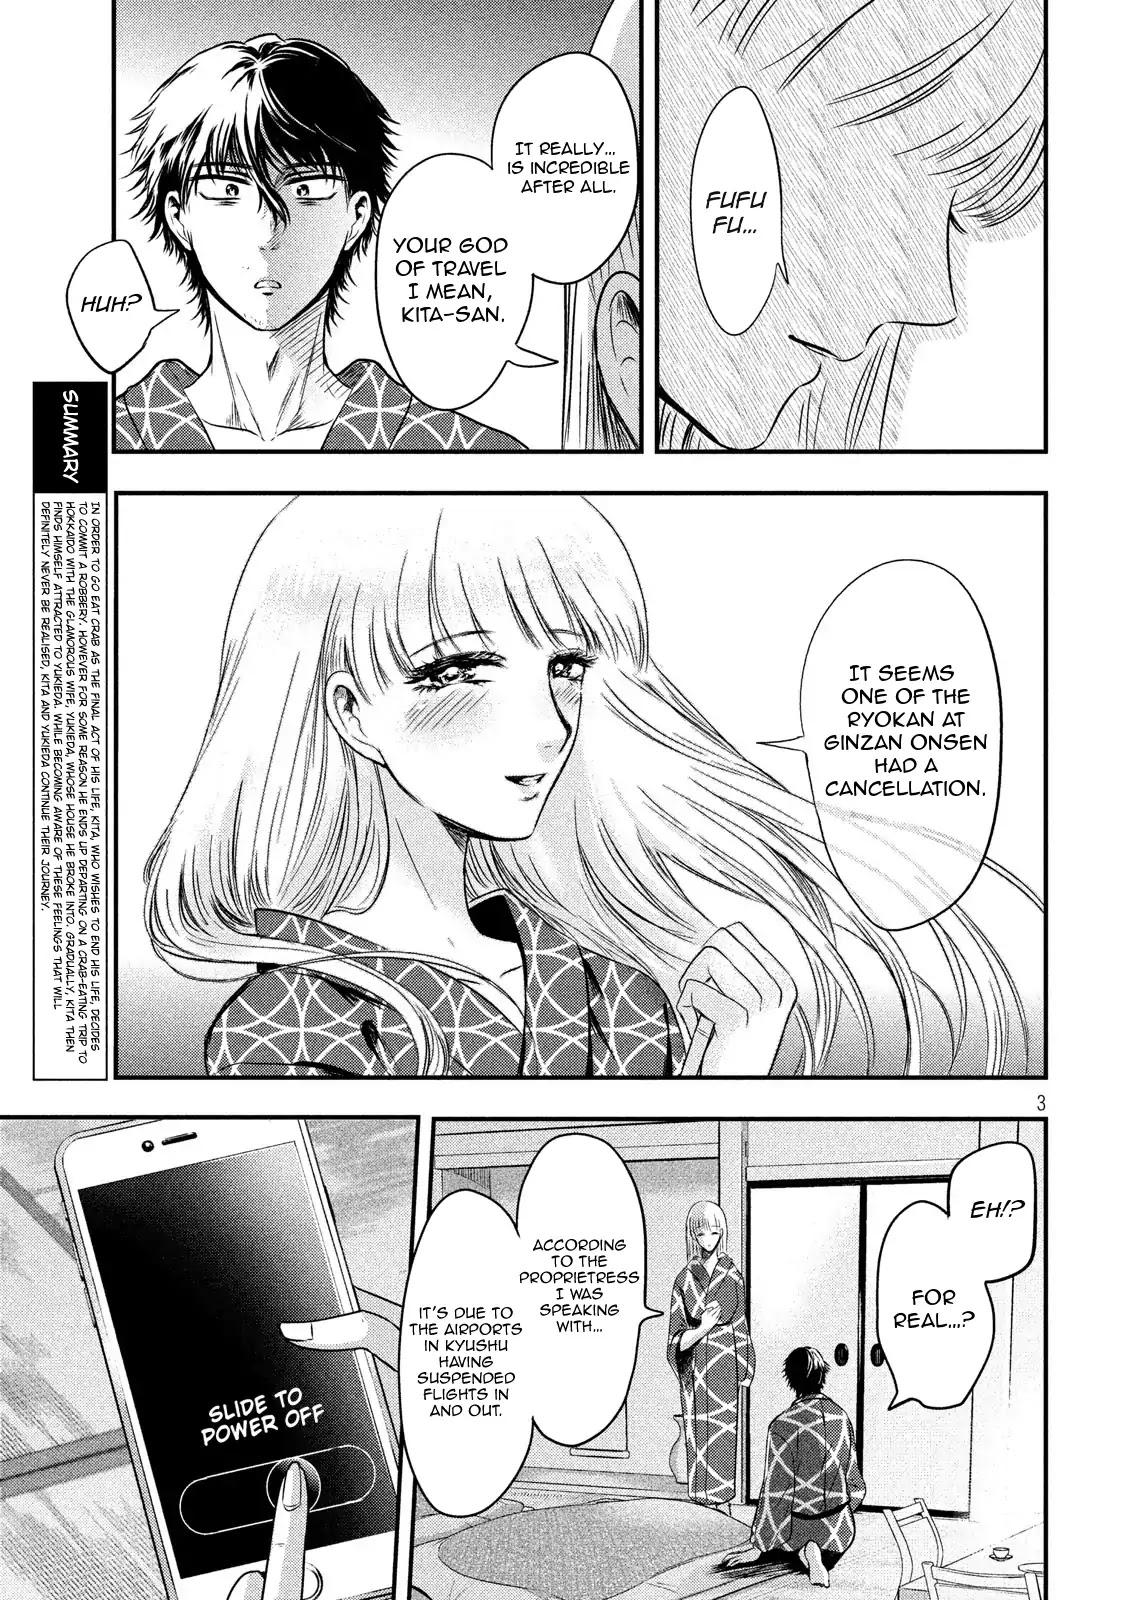 Eating Crab With A Yukionna - Page 3